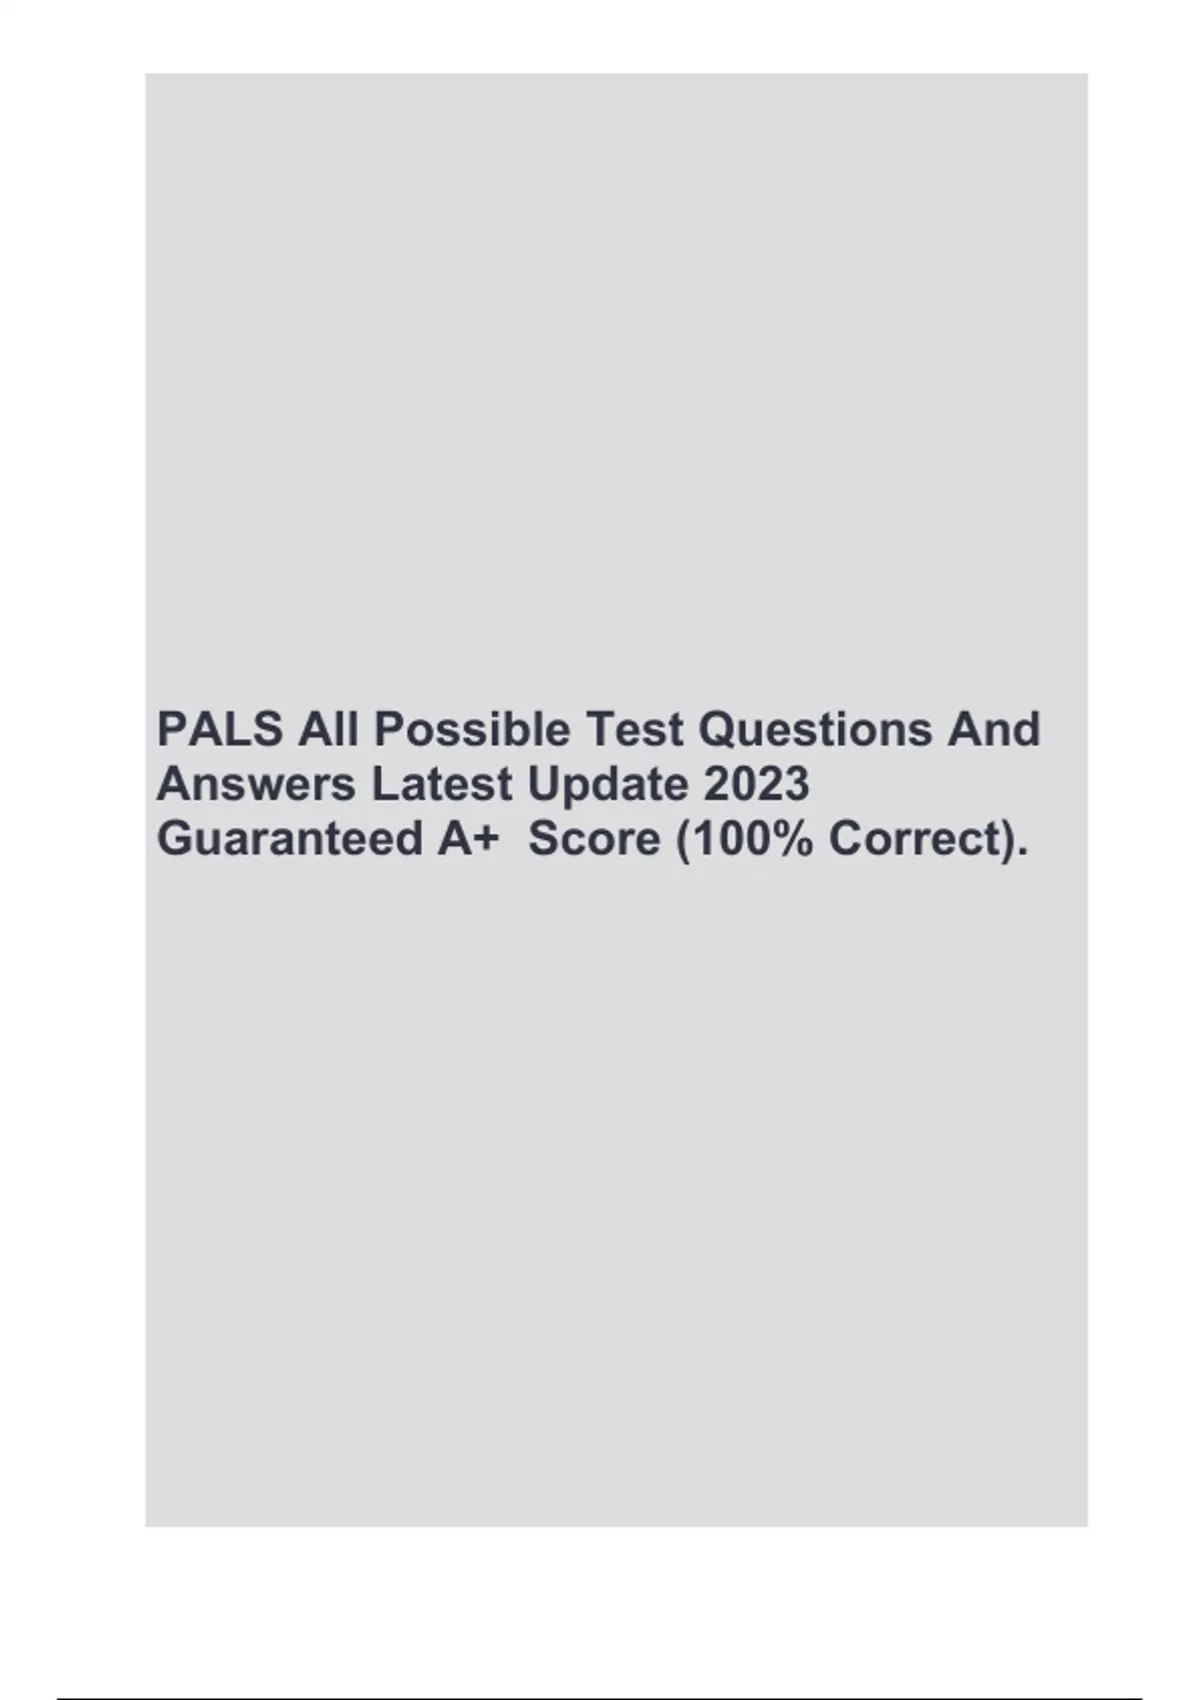 PALS All Possible Test Questions And Answers Latest Update 2023 Guaranteed A+ Score (100